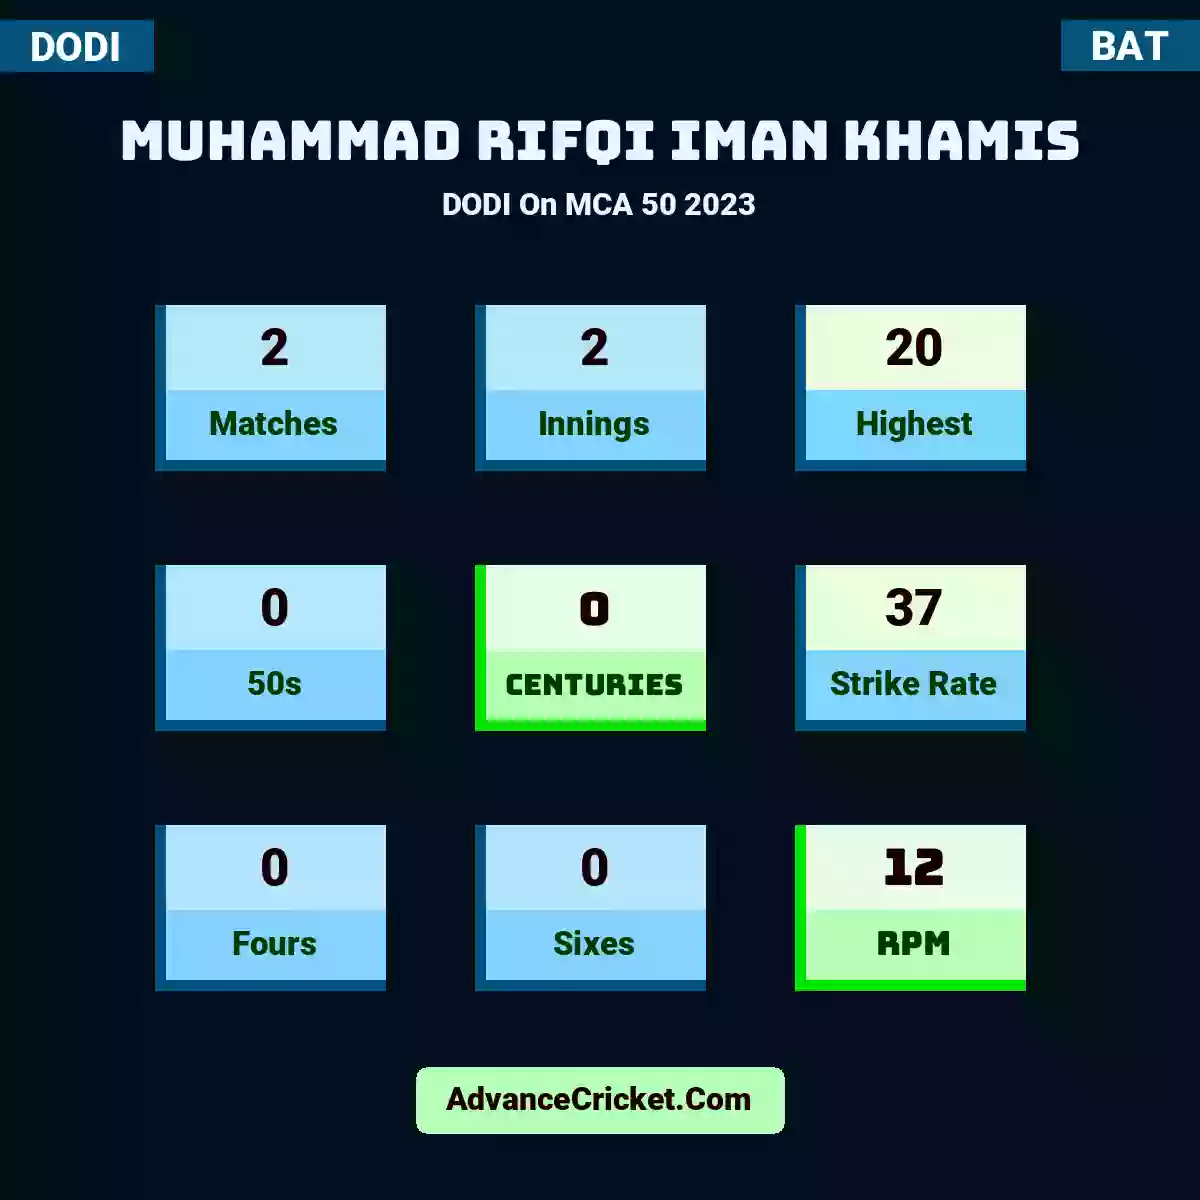 Muhammad Rifqi Iman Khamis DODI  On MCA 50 2023, Muhammad Rifqi Iman Khamis played 2 matches, scored 20 runs as highest, 0 half-centuries, and 0 centuries, with a strike rate of 37. m.rifqi.iman.khamis hit 0 fours and 0 sixes, with an RPM of 12.